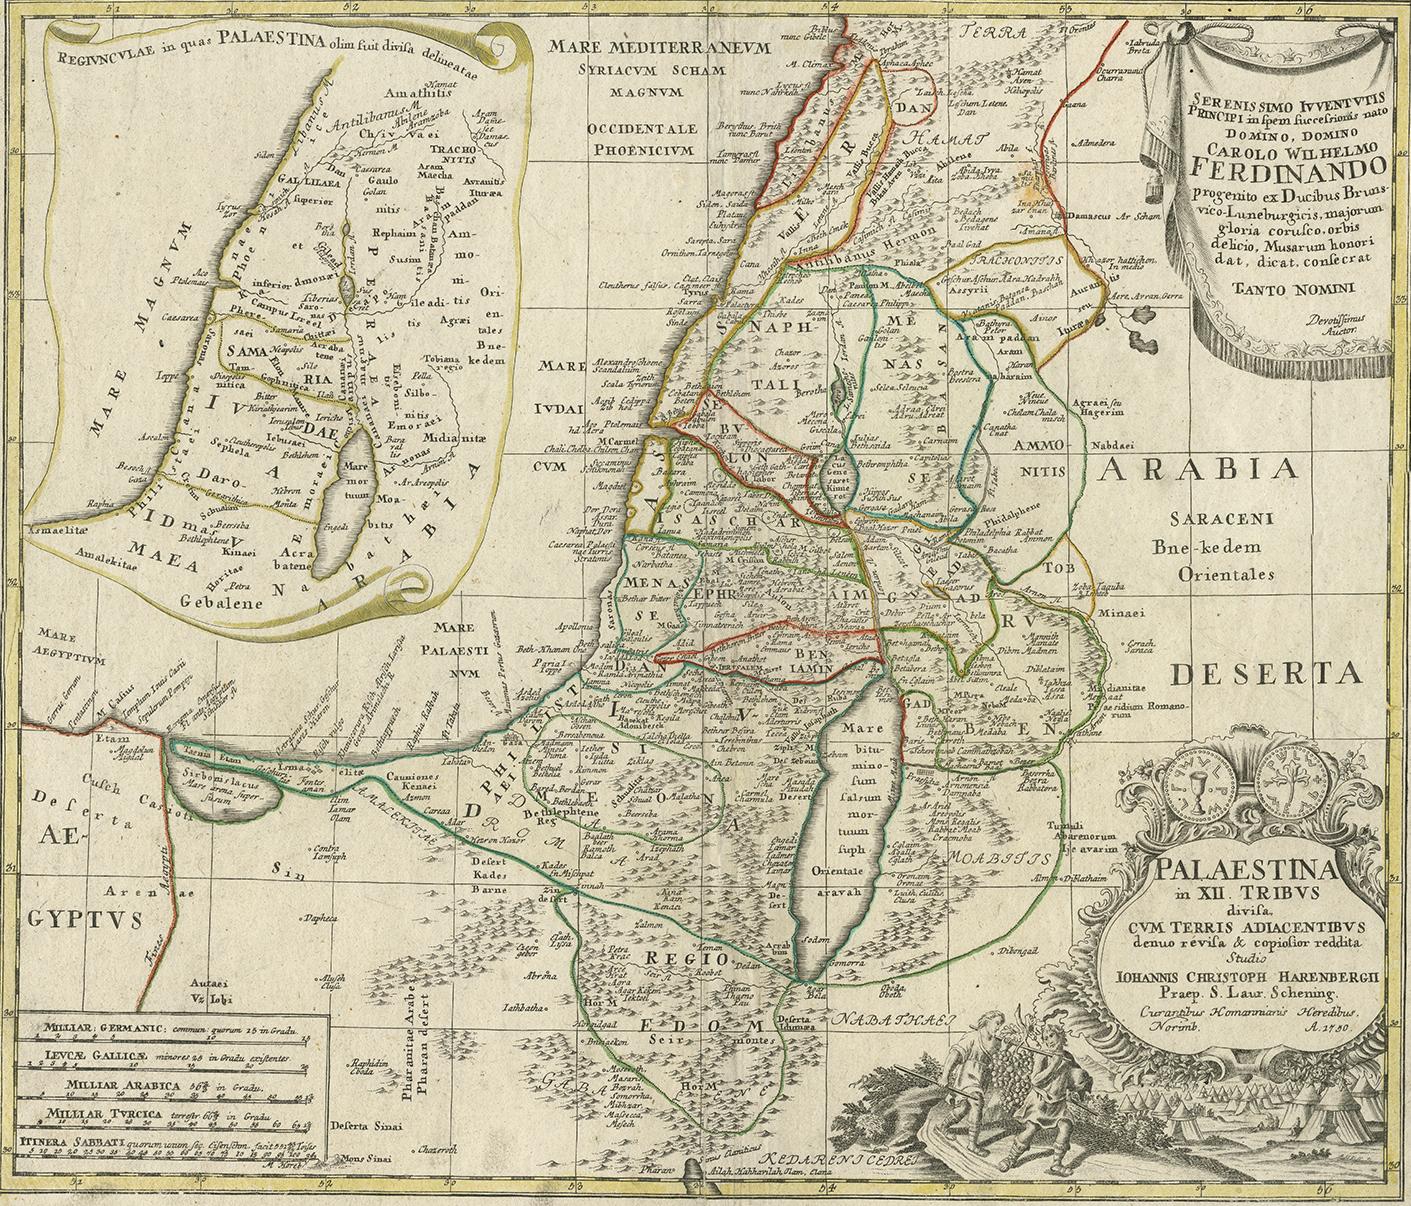 Map of the Holy Land divided into the areas of the 12 tribes of Israel. Beneath the cartouche is an illustration of two spies of Moses returning to the tent camp of the Israelites bearing an oversized cluster of grapes, representing the fruits of